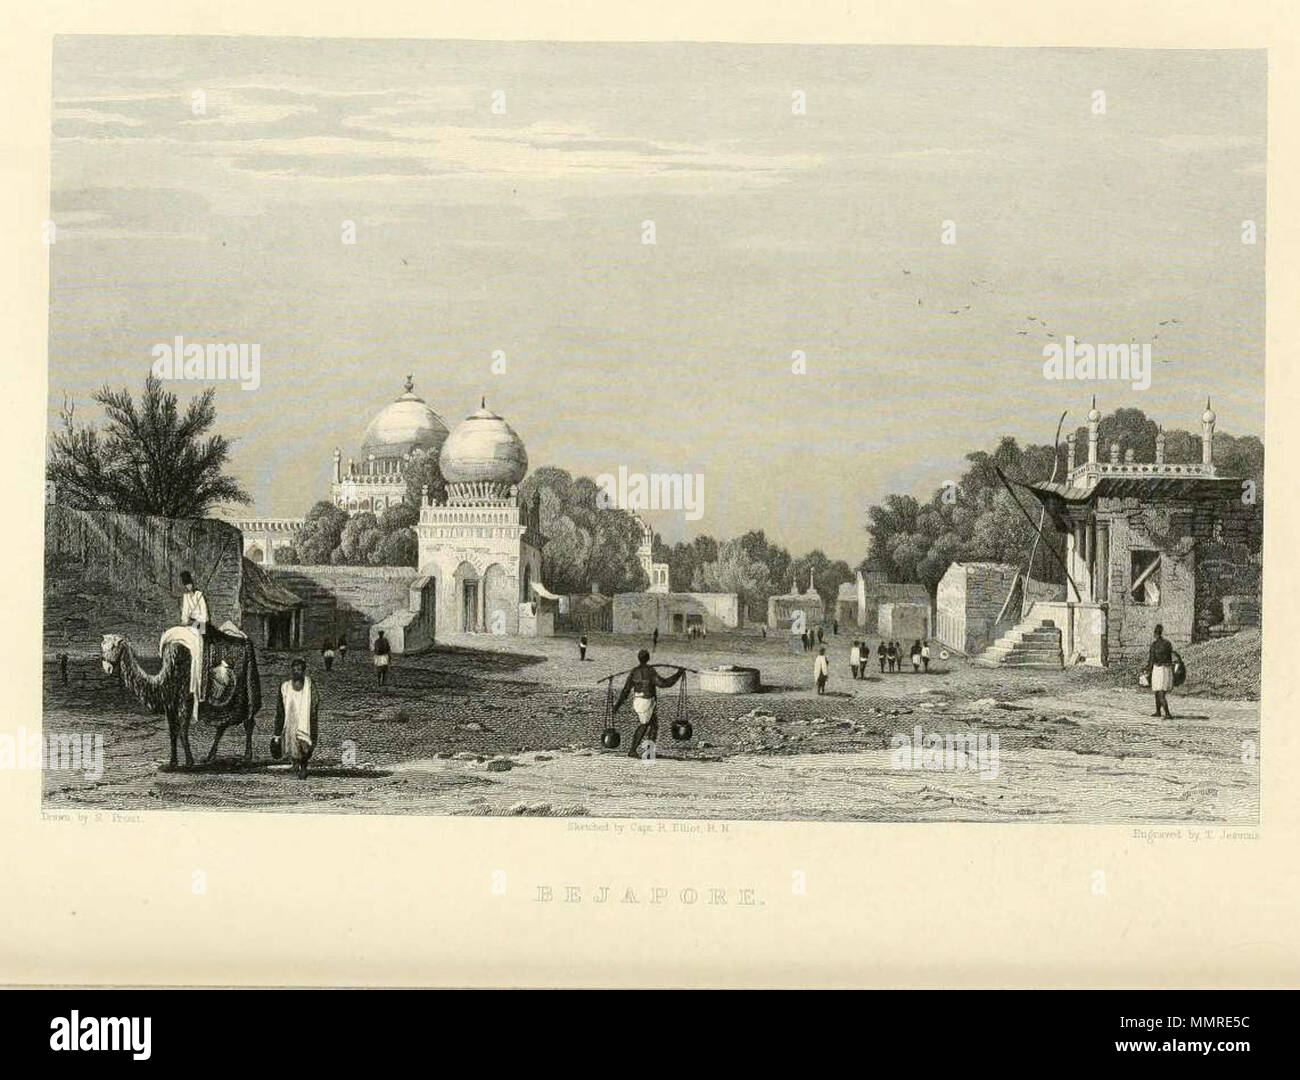 . English: 'Bejapore,' from vol. 3 of 'The Indian Empire' by Robert Montgomery Martin, c.1860; also *'Mosque of Mustapha Khan, Bejapore'*; also *'Assar Mahal, Bejapore'*; also '*Singham Mahal, Torway'*; also *'Palace of the Seven Stories, Bejapore'*; also *'The Seven-storied Palace, Bejapore'*  . circa 1860.   Robert Montgomery Martin  (1801–1868)     Description British officer, surgeon, botanist and naturalist  Date of birth/death 1801 6 September 1868  Location of birth/death Dublin Sutton  Authority control  : Q6874906 VIAF:?59320676 ISNI:?0000 0000 7357 8963 LCCN:?n82024529 NLA:?35331060  Stock Photo